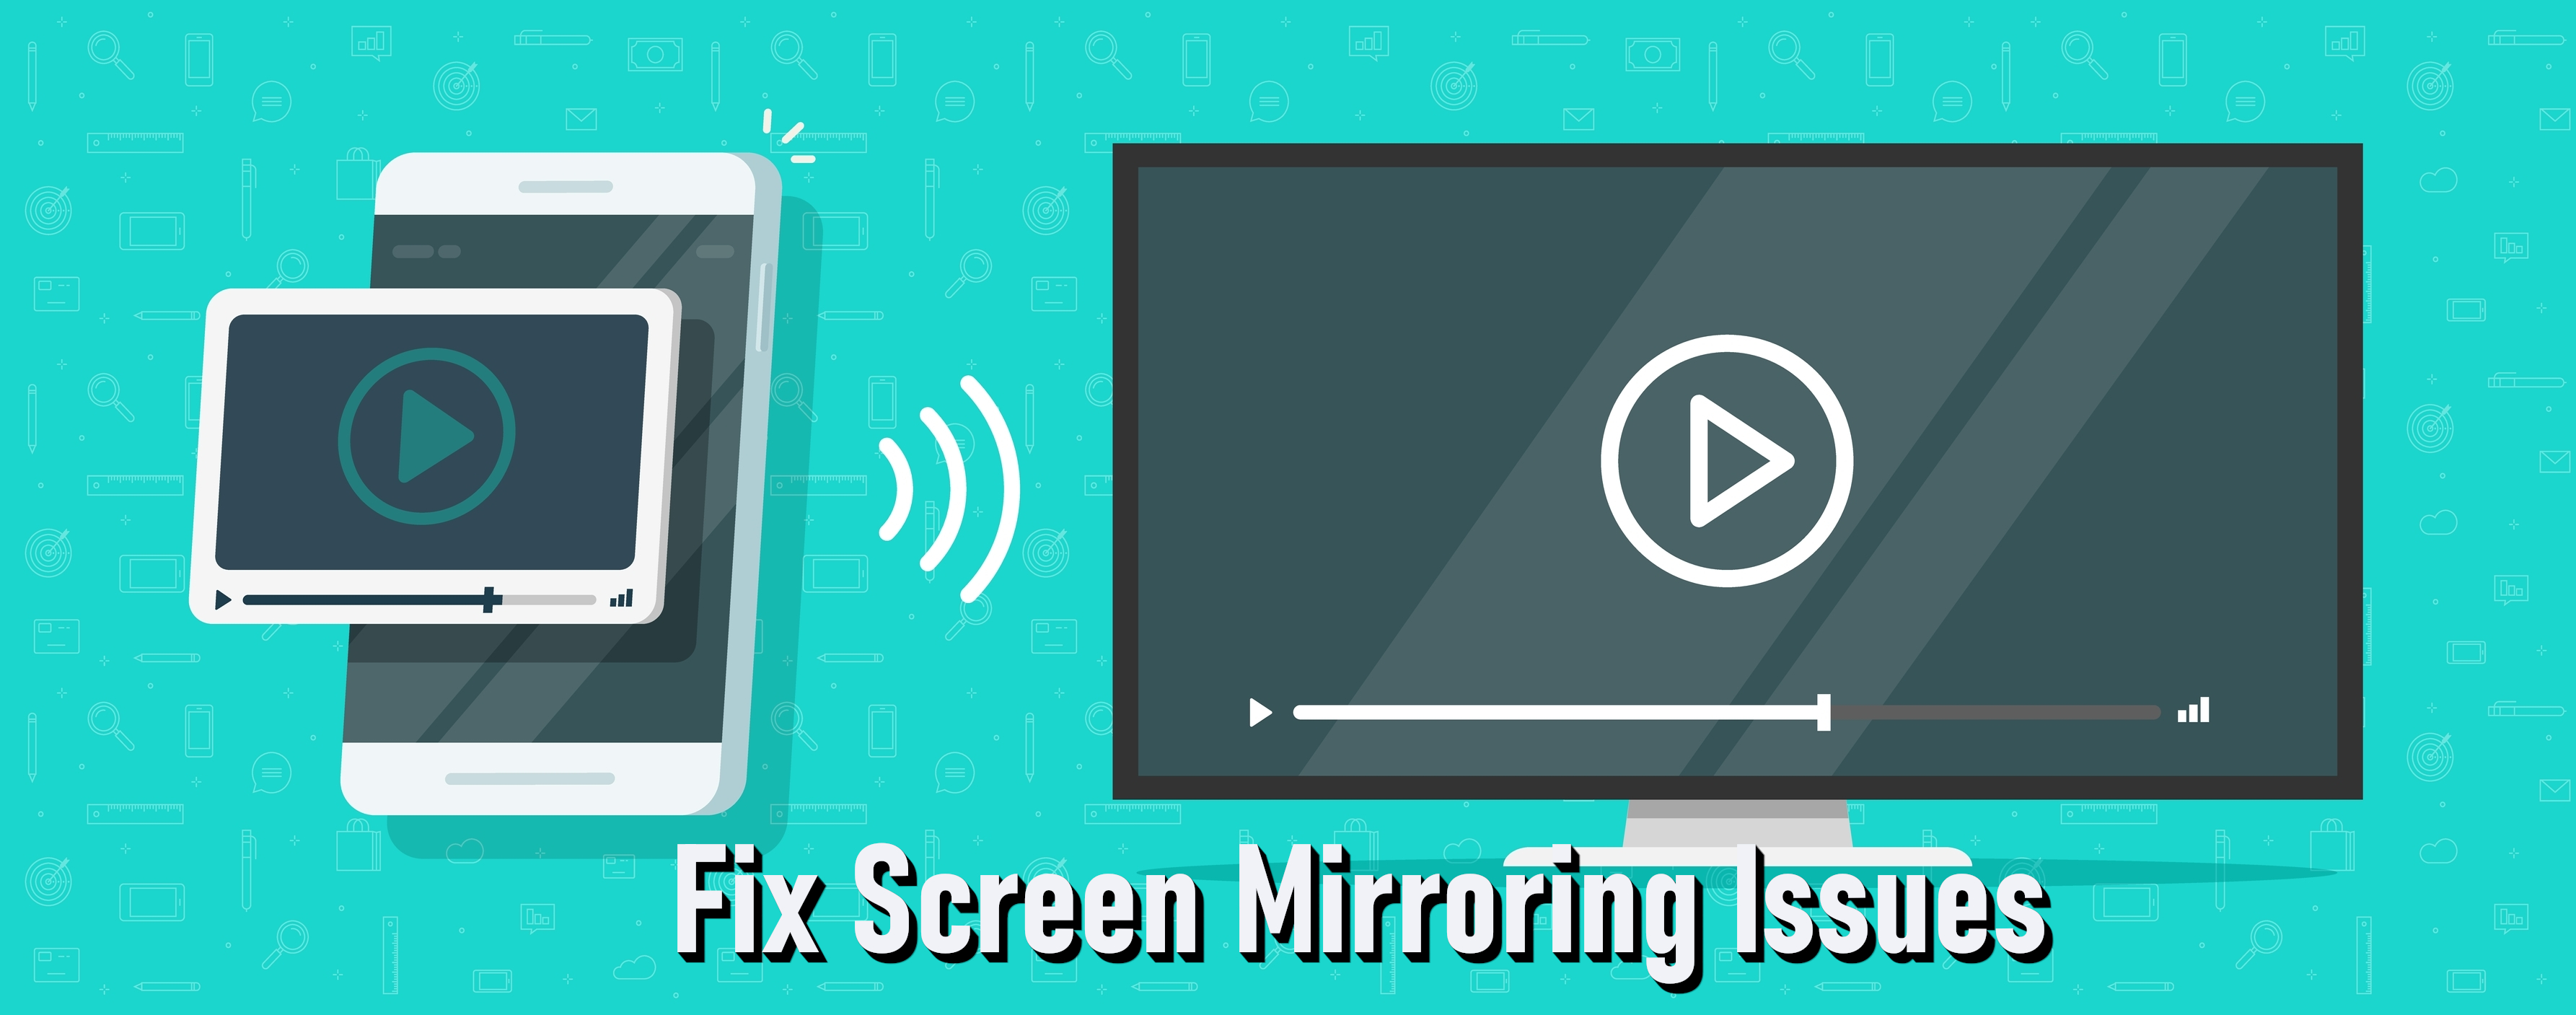 Screen Mirroring Woes Simple Solutions for Common Issues